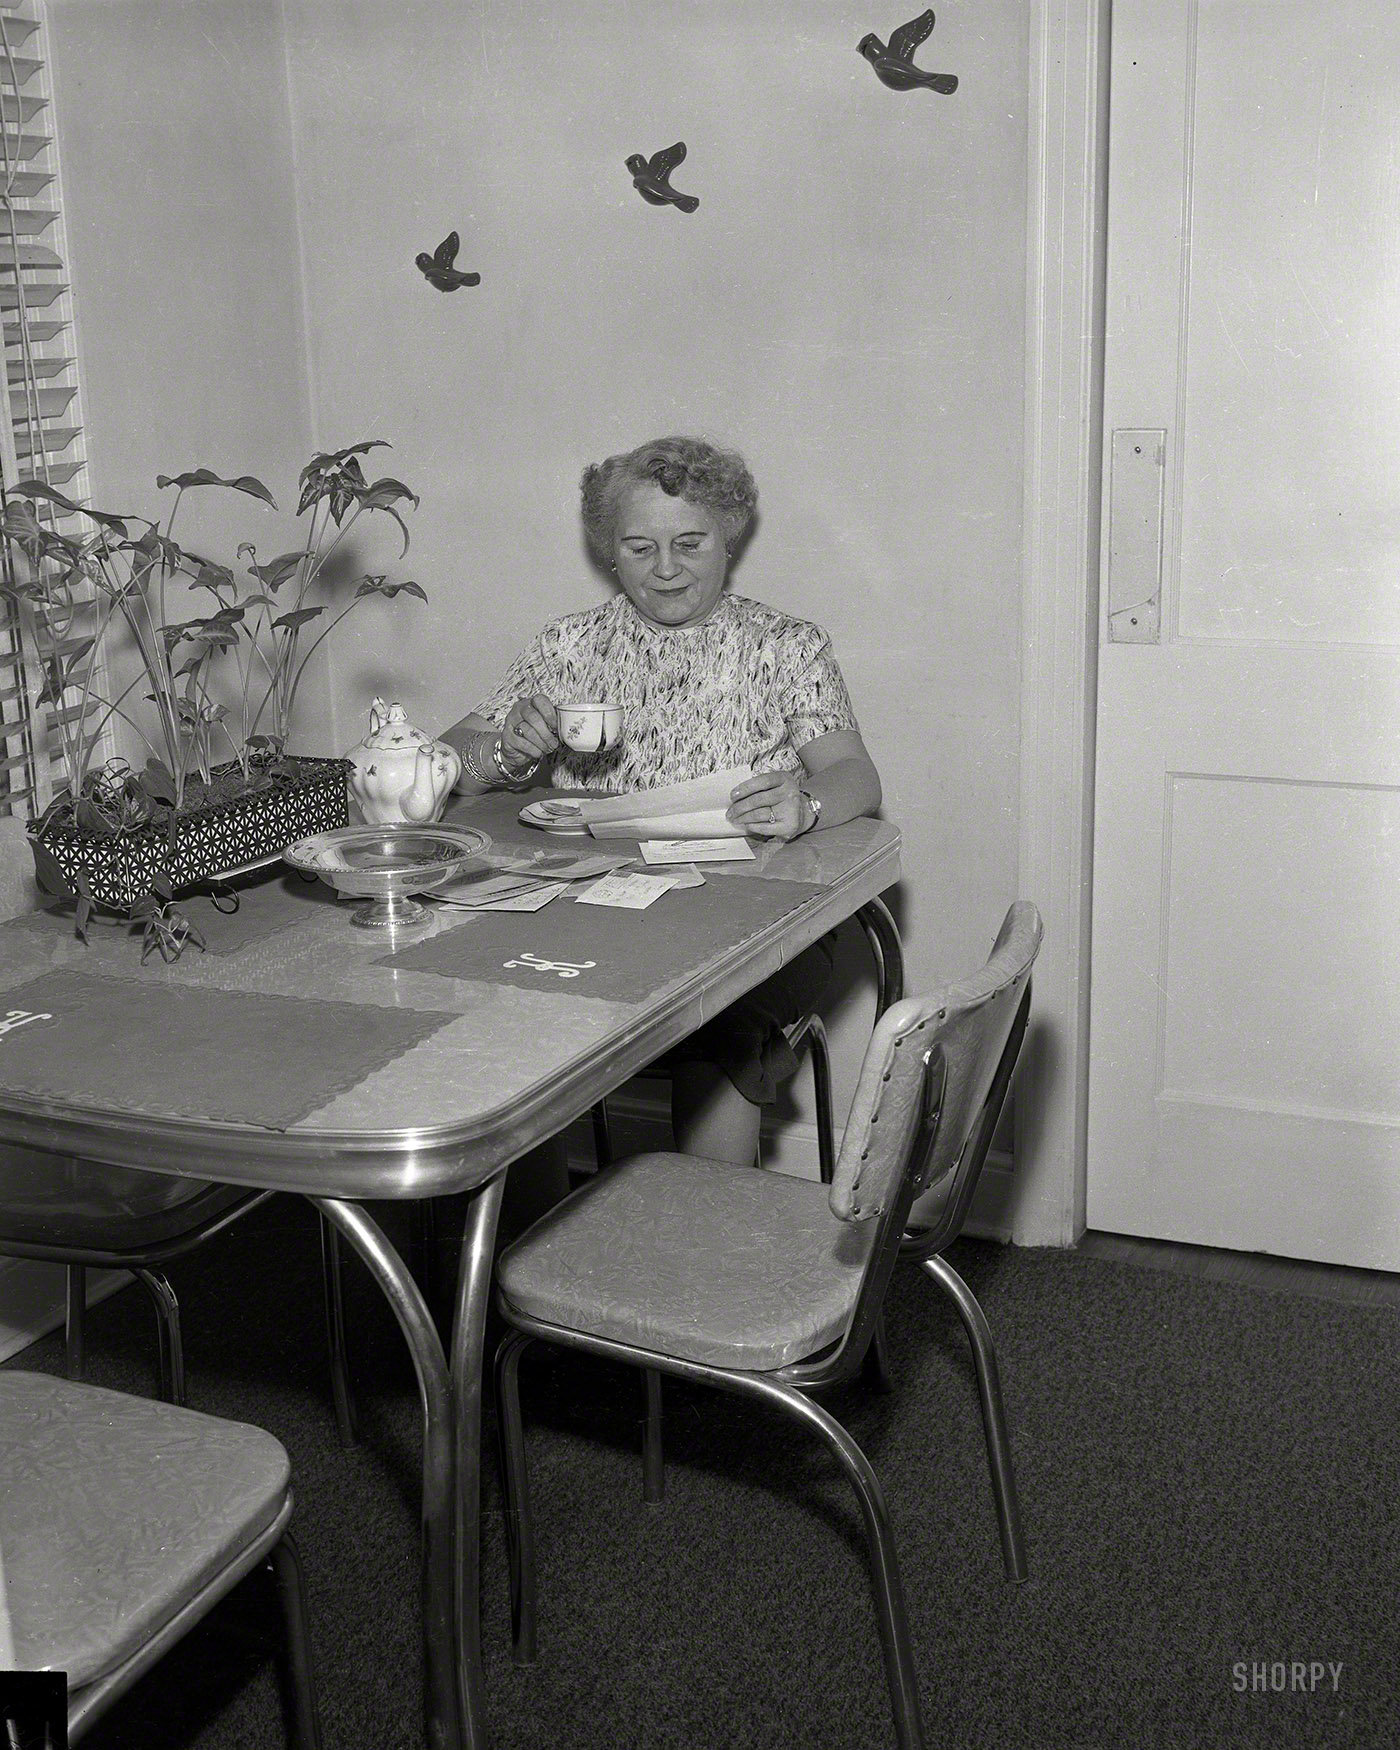 Columbus, Georgia, circa 1955. "Helen Smothers" is all it says here. The World of Helen is tidy, organized and monogrammed. 4x5 acetate negative. View full size.